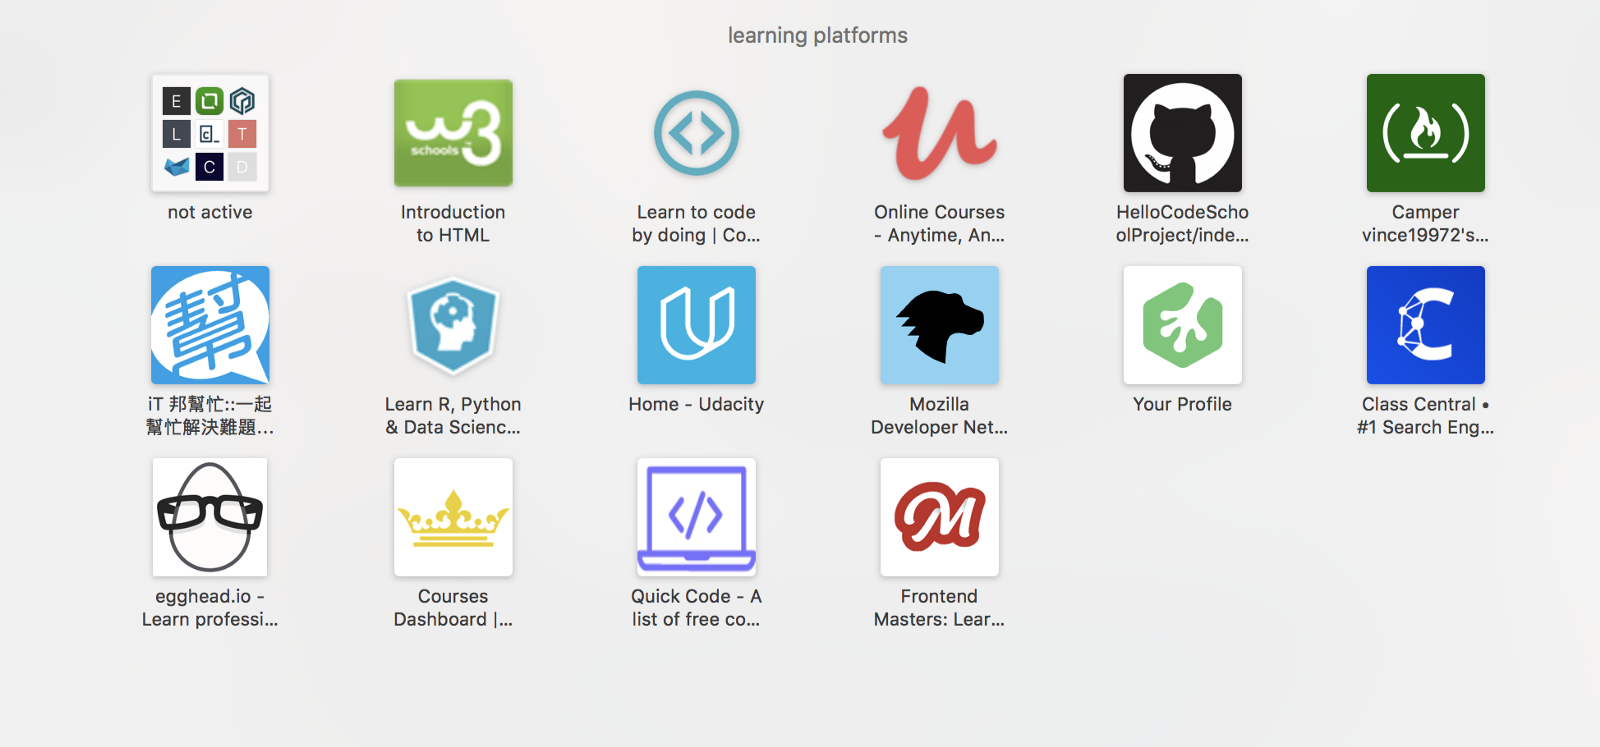 My bookmarks of learning platforms in Safari